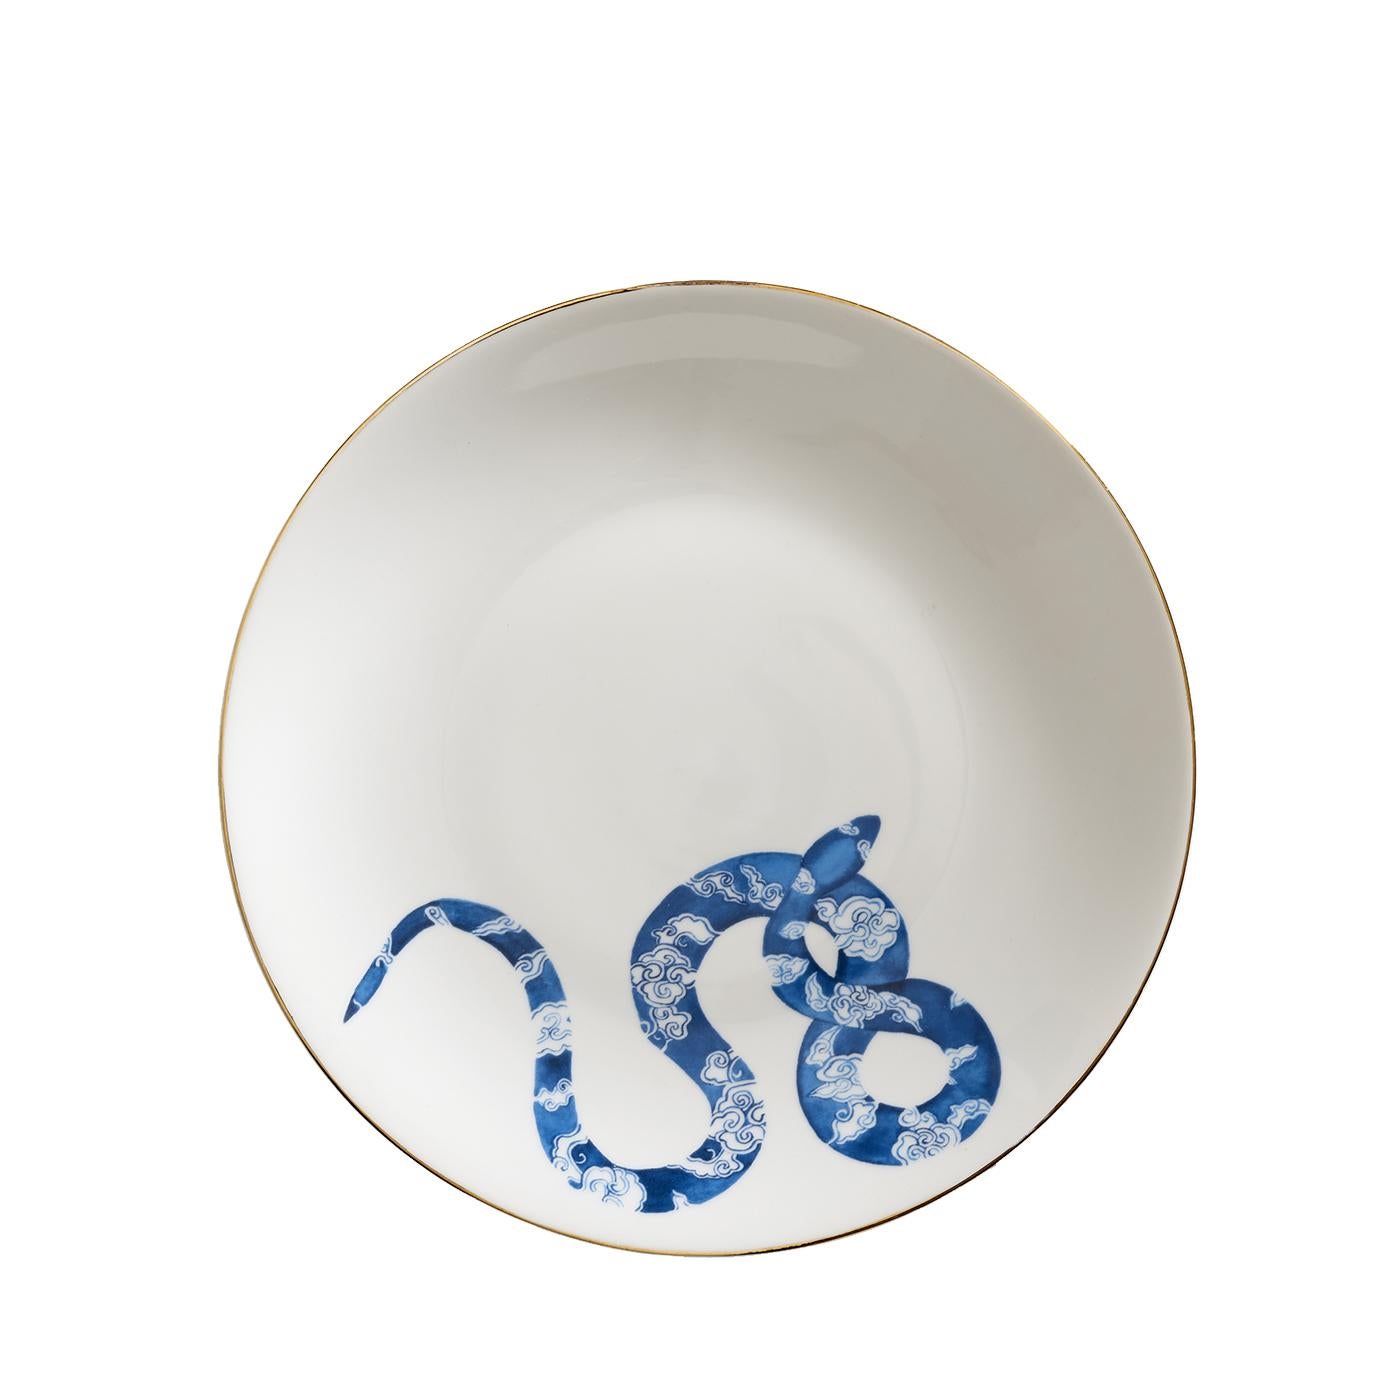 Part of a collection depicting various colorful snakes to ornate each precious piece, this set is made of one dinner plate, one soup plate, and one dessert plate, all entirely made in Italy using fine Limoges porcelain with a polished gold trim